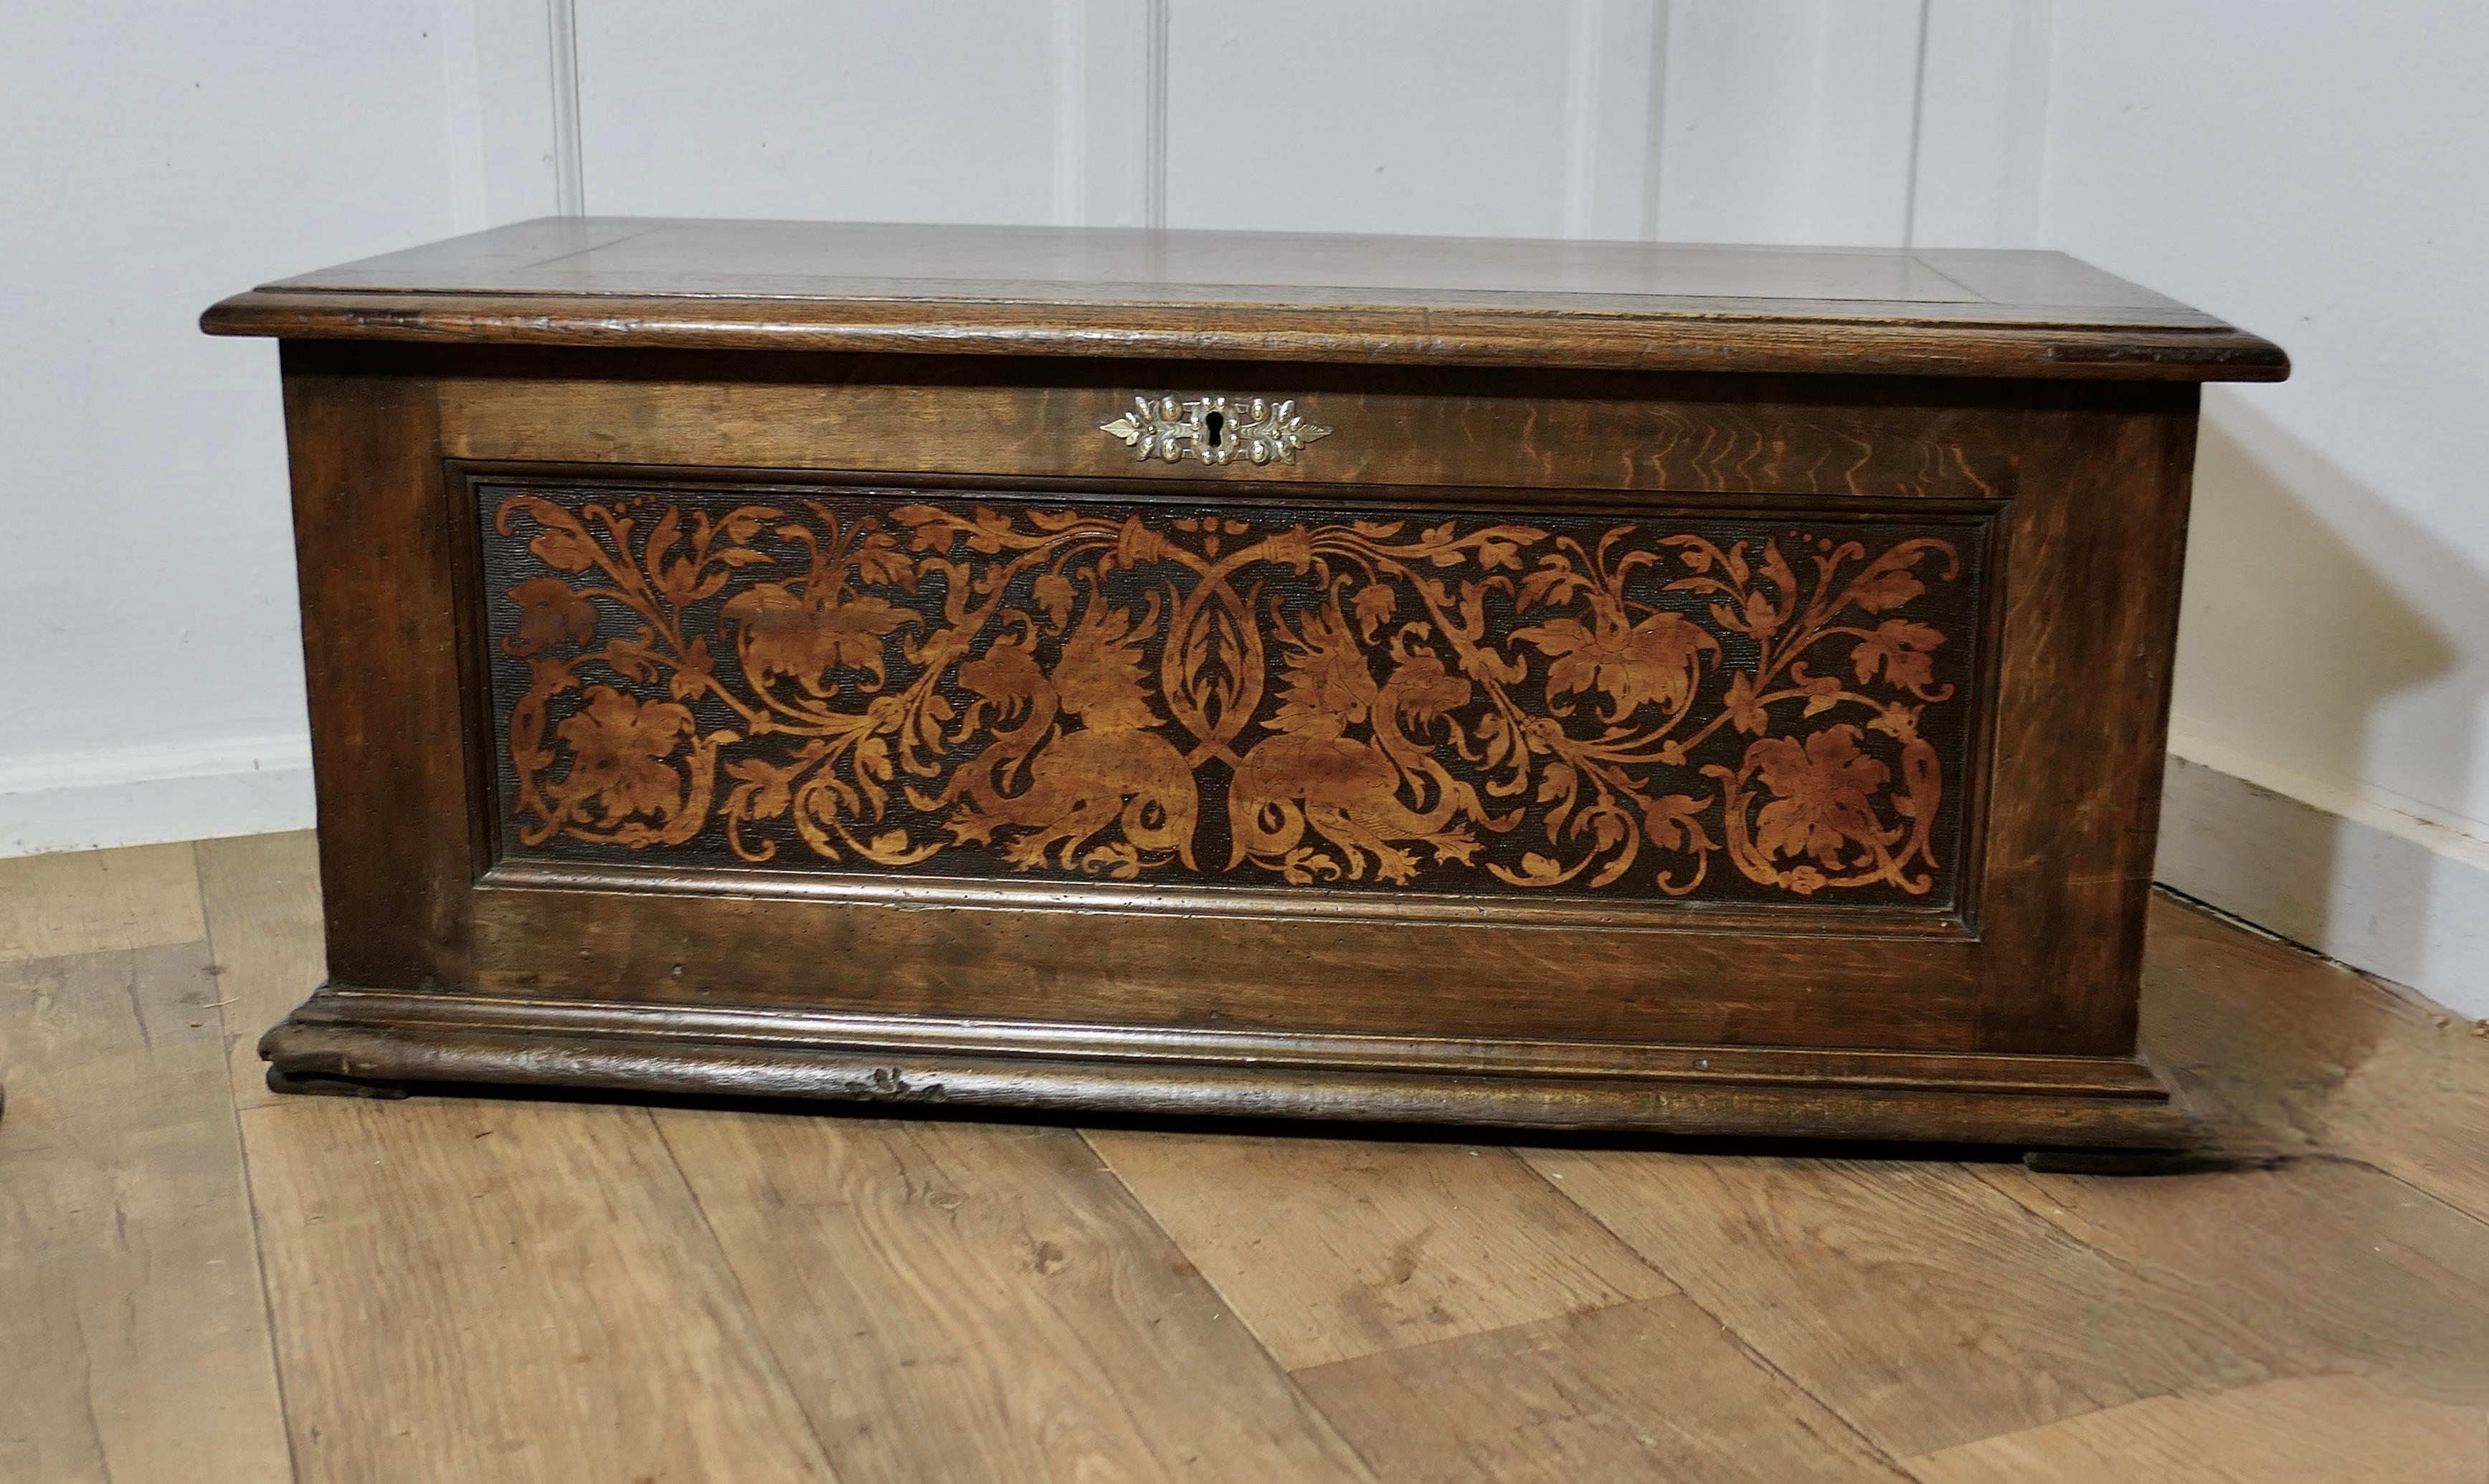 Arts and Crafts Carved Oak Marriage Chest or Carved Coffer

This is a lovely old piece, and is in remarkably good condition for its age, the coffer has gothic carvings of Dragons and fauna on the front and sides 
On the inside there are hand painted